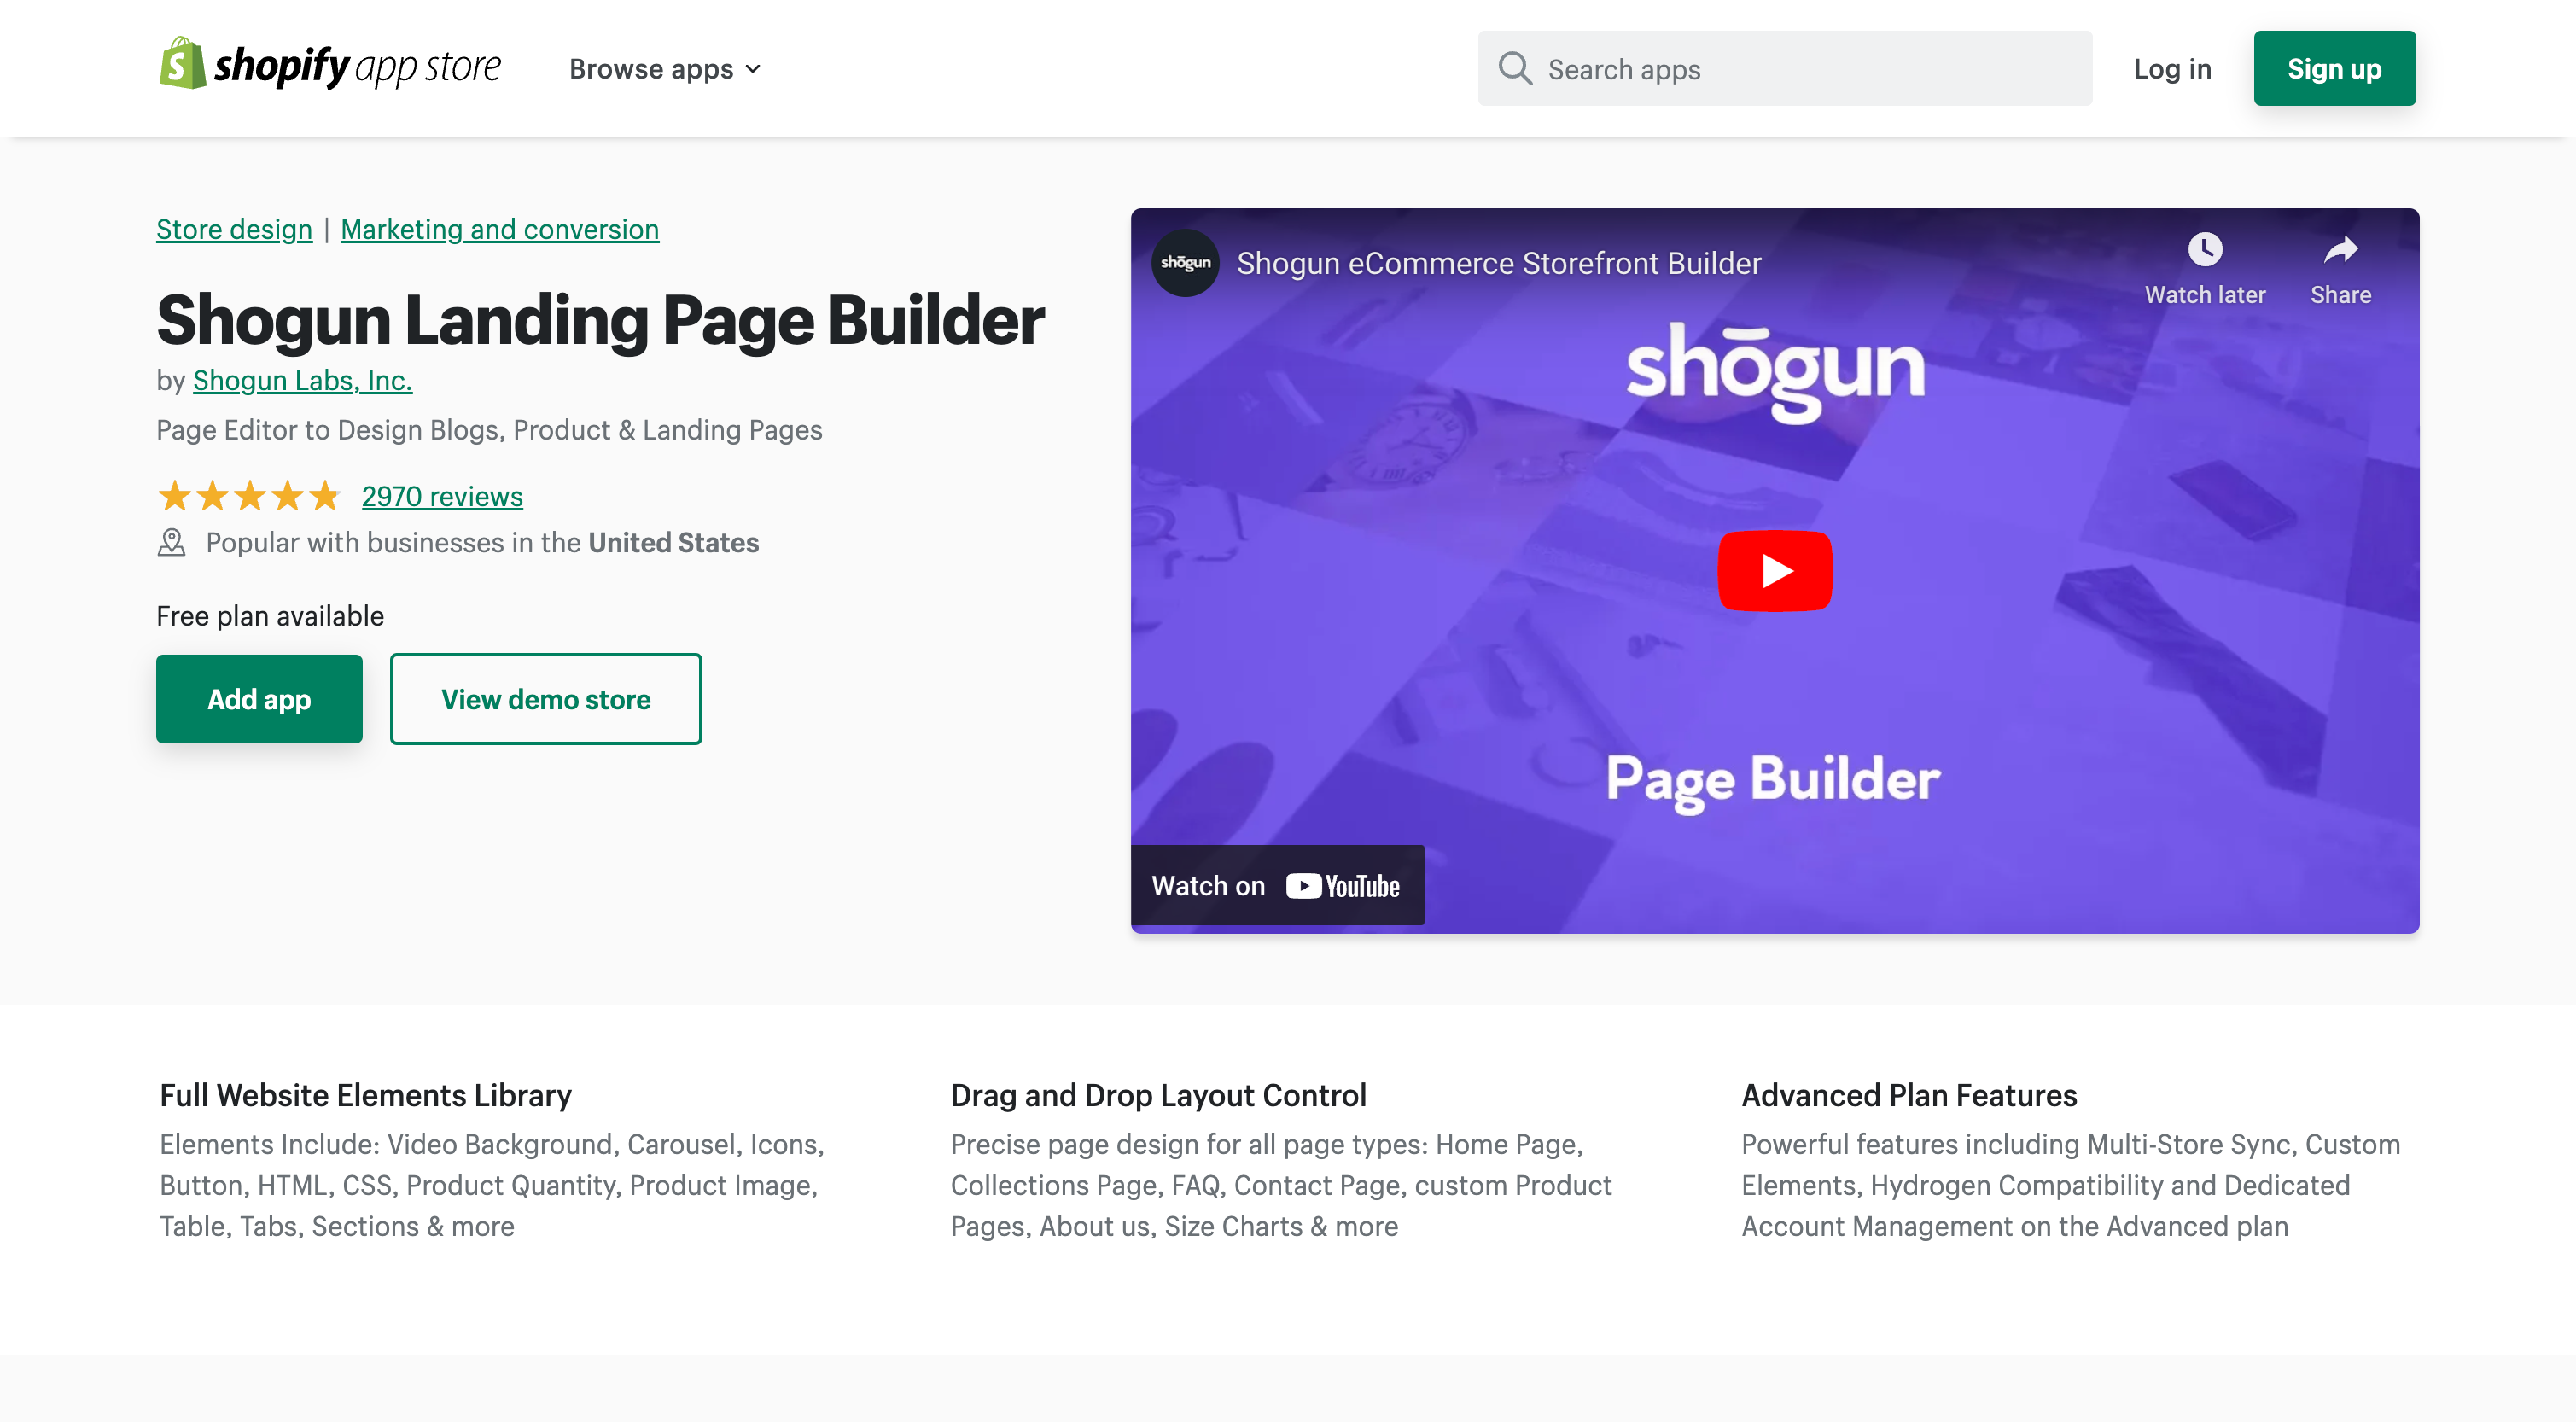 Shogun Landing Page Builder - Page Editor to Design Blogs, Product & Landing Pages